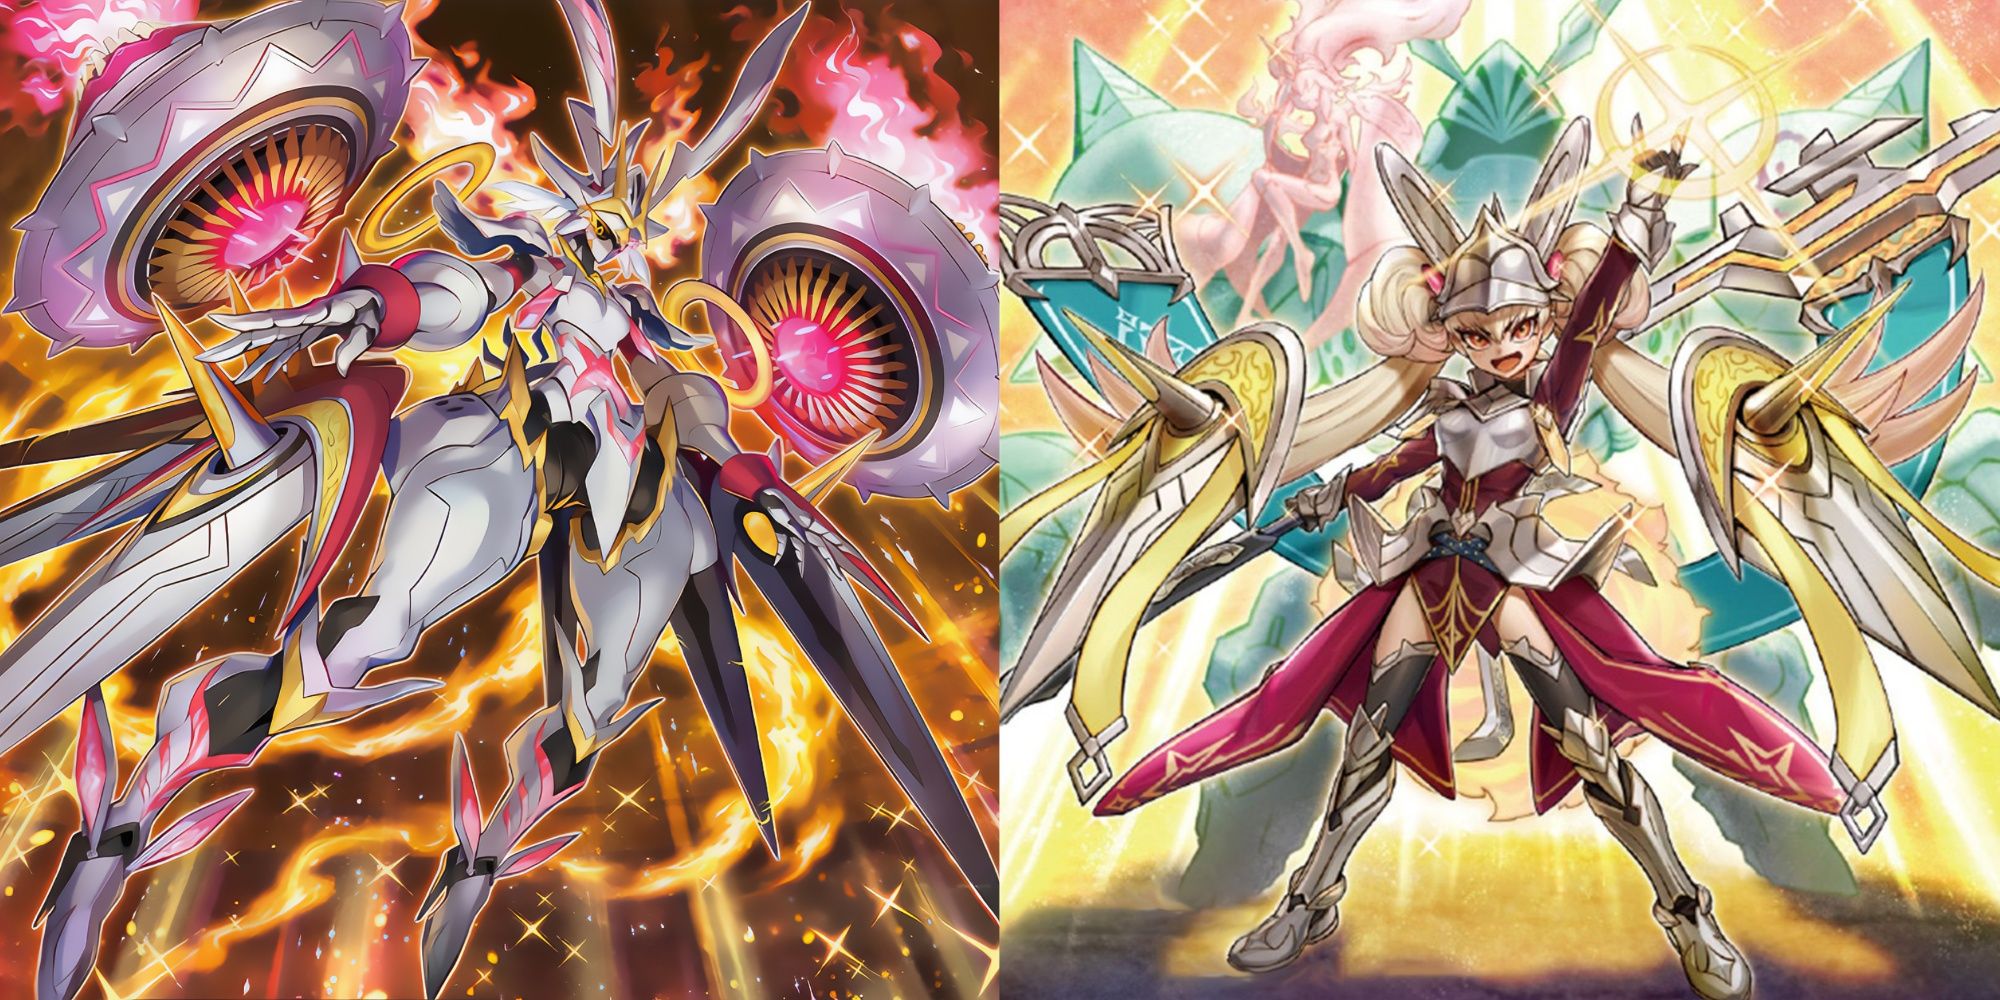 Yu-Gi-Oh Full Artworks of Centur-Ion Legatia and Primera, used for Featured Image. 